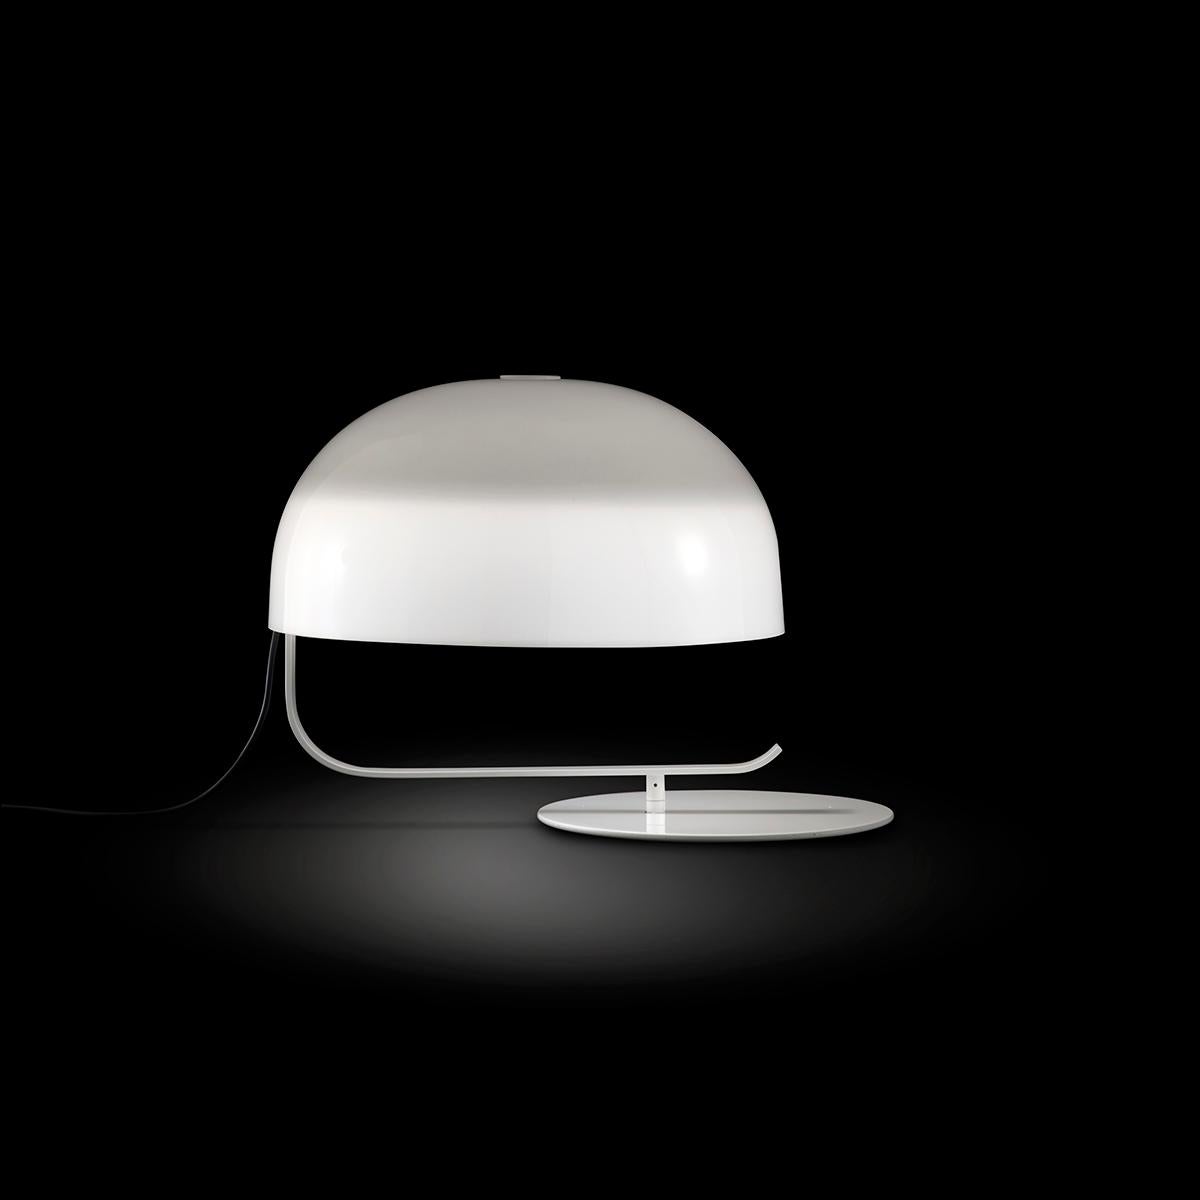 Table lamp 'Zanuso' designed by Marco Zanuso in 2013.
Table lamp giving diffused light. Opal PMMA diffuser rotating on the base. Painted metal curved support and base.
Manufactured by Oluce, Italy.

In 1963, Marco Zanuso designed the model 275 table